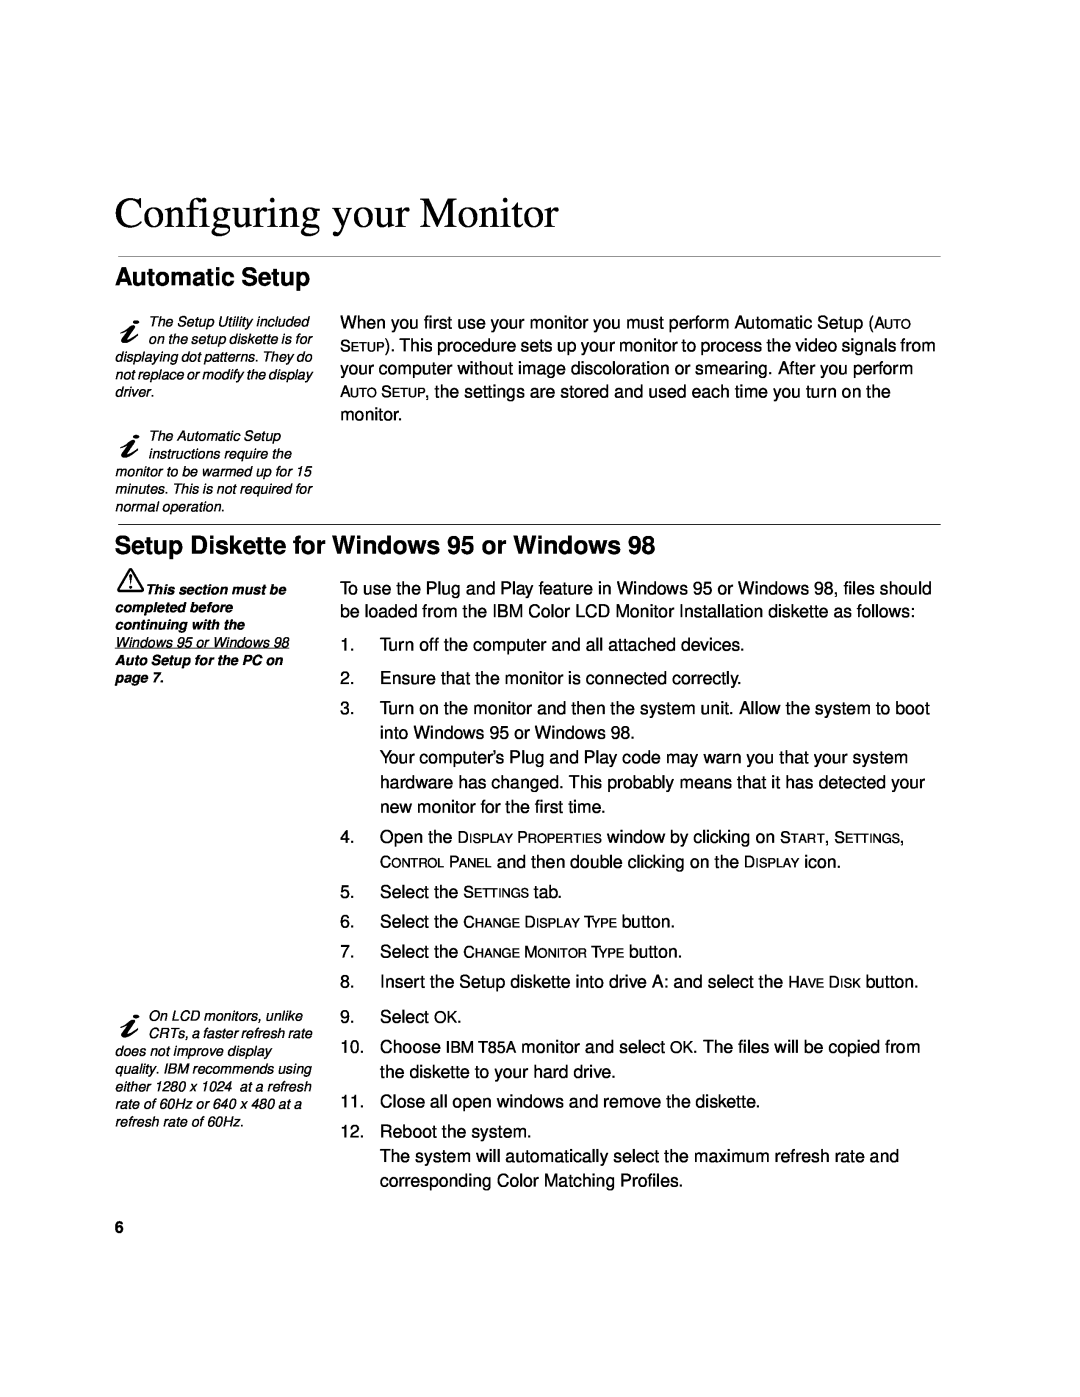 IBM T 85A, 9519-AG, 9519-AW1, 21L4365 Configuring your Monitor, Automatic Setup, Setup Diskette for Windows 95 or Windows 